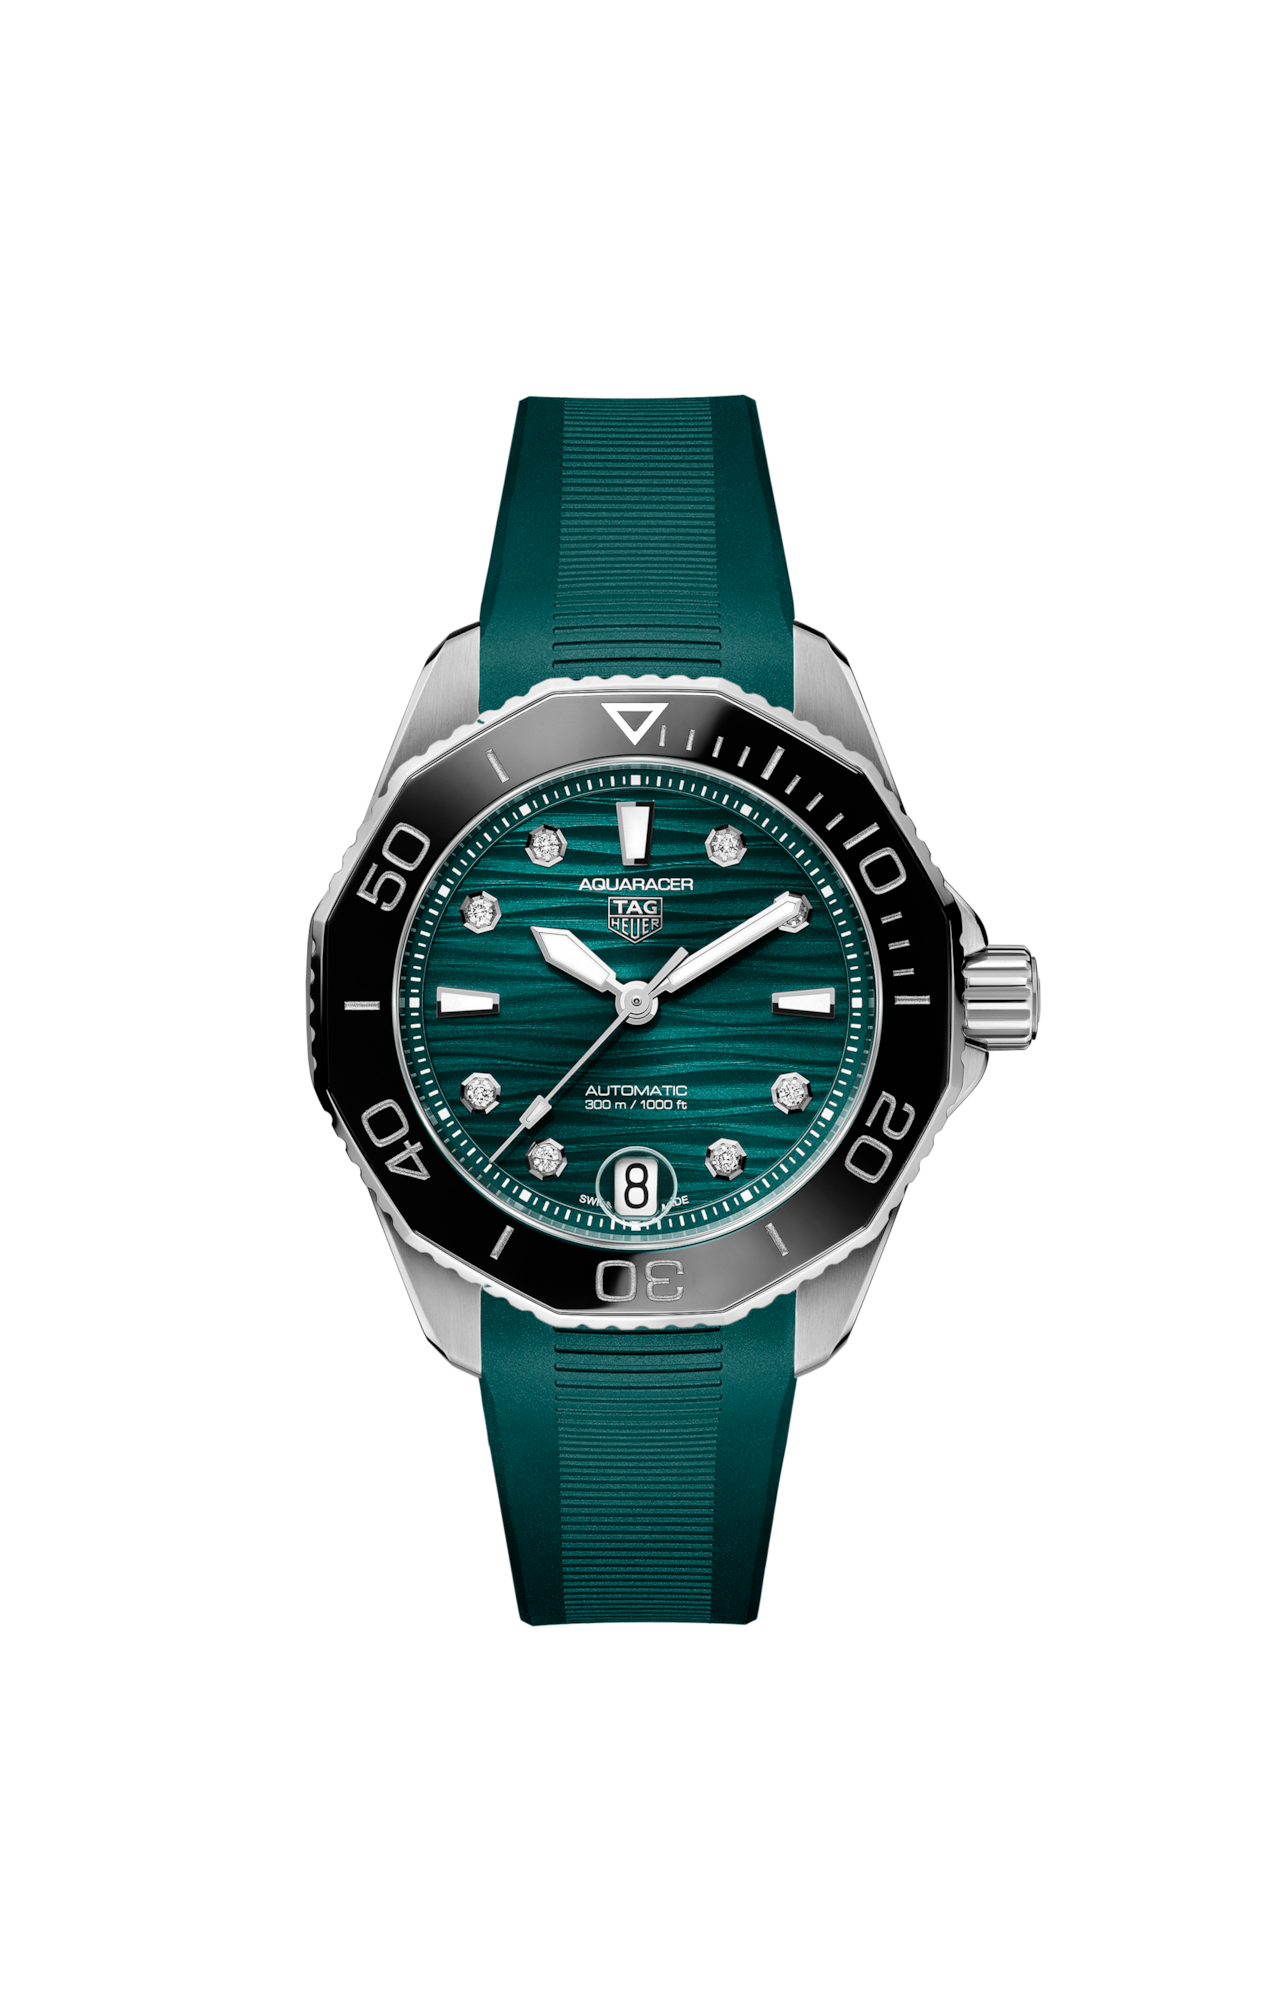 TAG HEUER AQUARACER PROFESSIONAL 300 DATE Automatic Watch-WBP231G.FT6226 - Kamal Watch Company